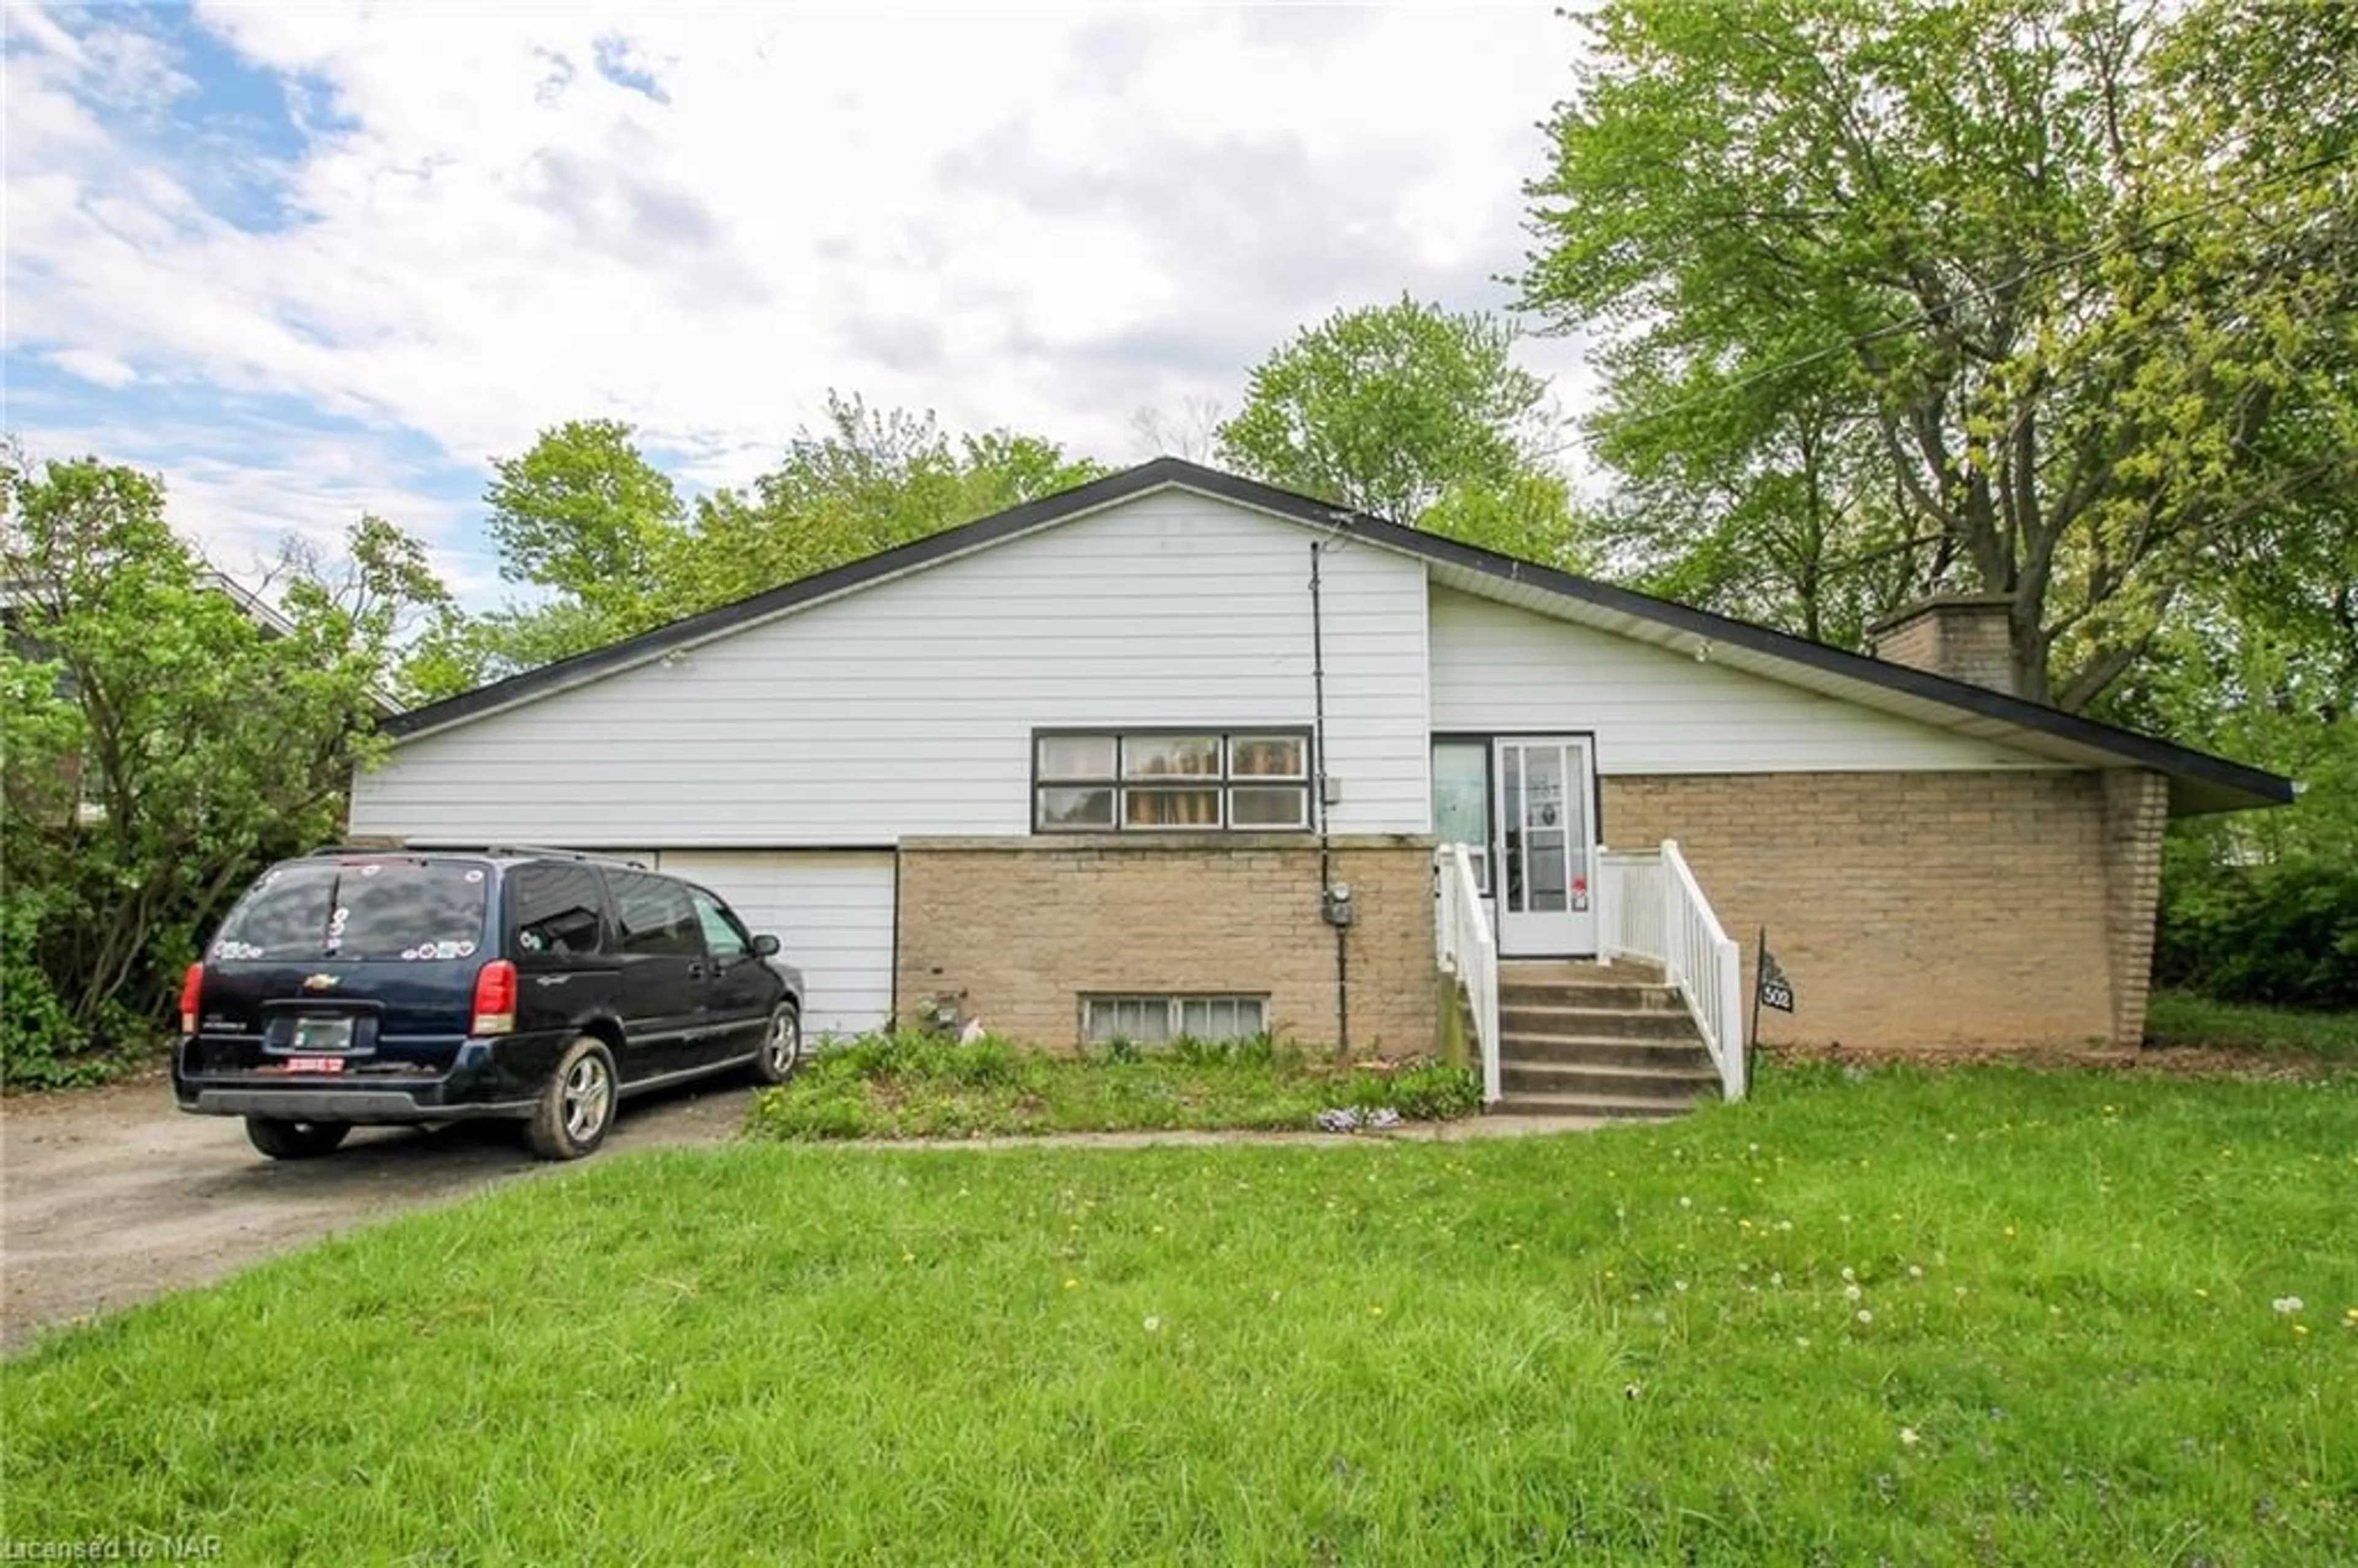 Outside view for 502 Clare Ave, Welland Ontario L3C 3B5